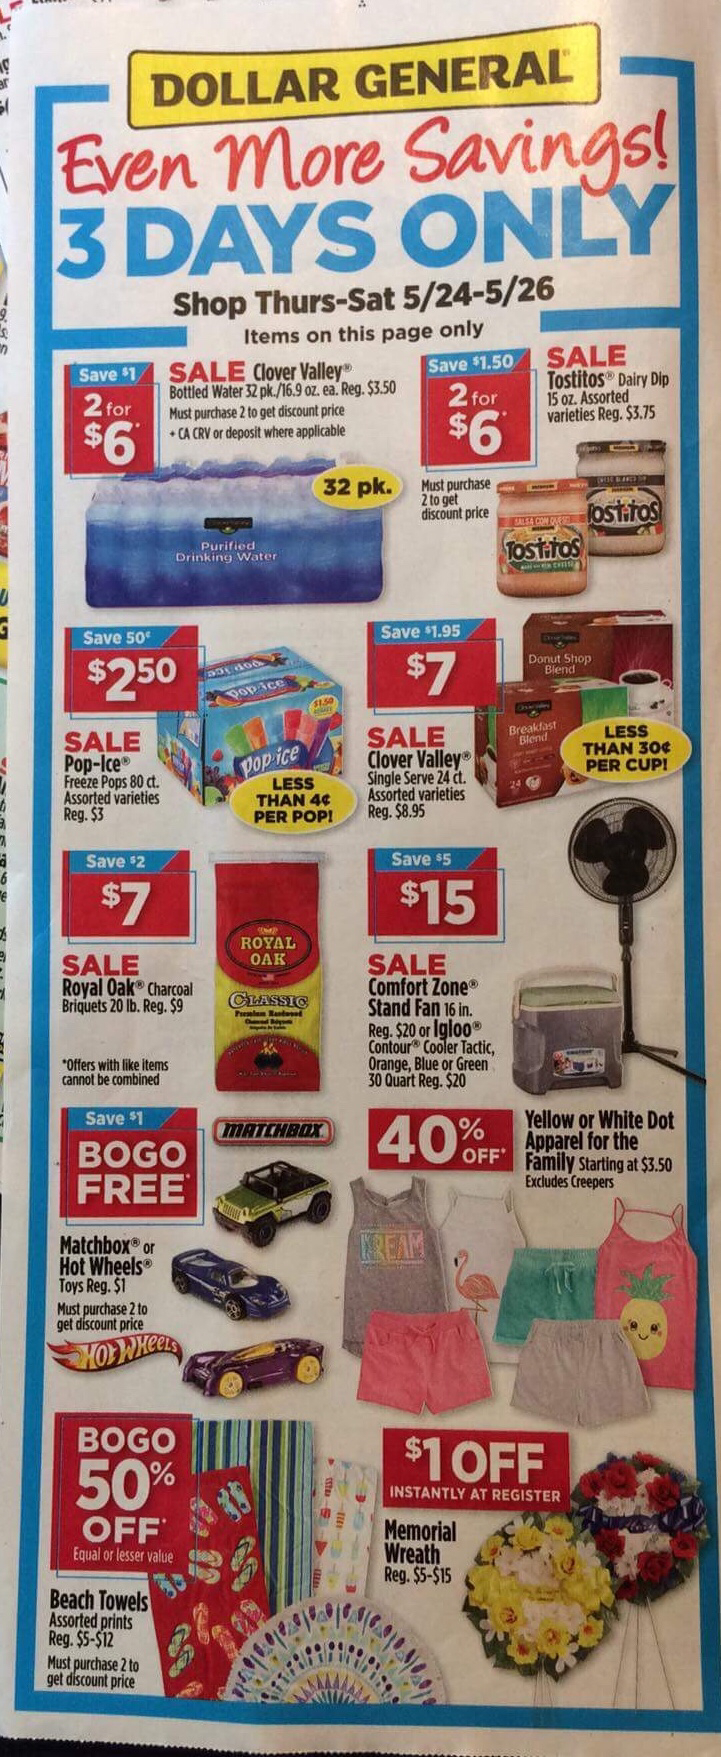 Dollar General Early Ad Scans - Free Printable Pringles Coupons